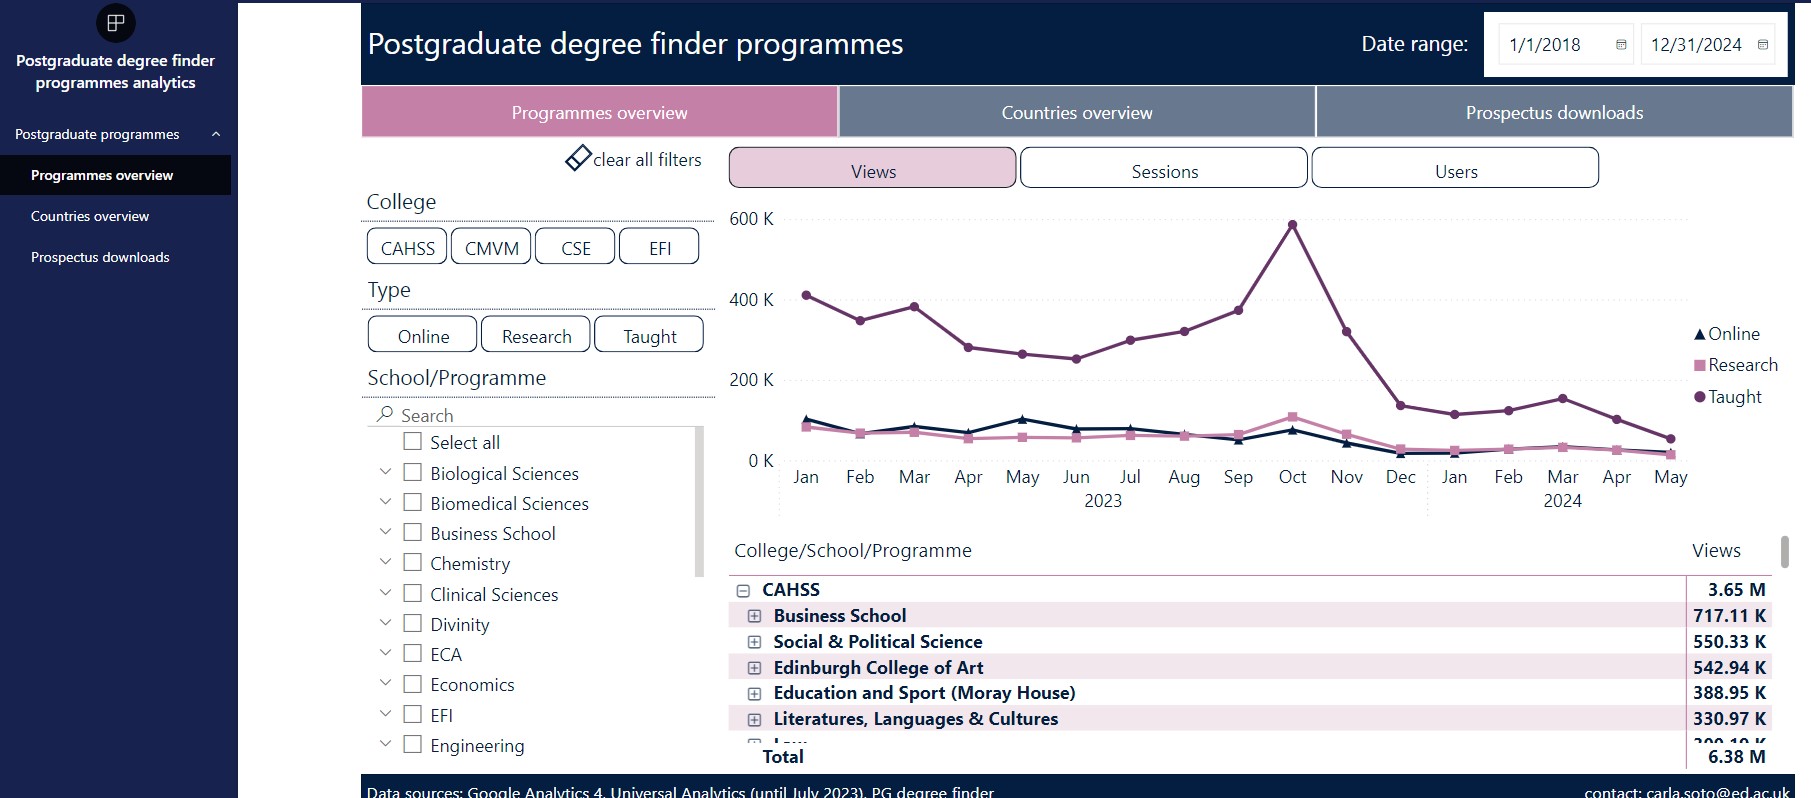 image showing the postgraduate analytics dashboard with a graph showing traffic numbers 